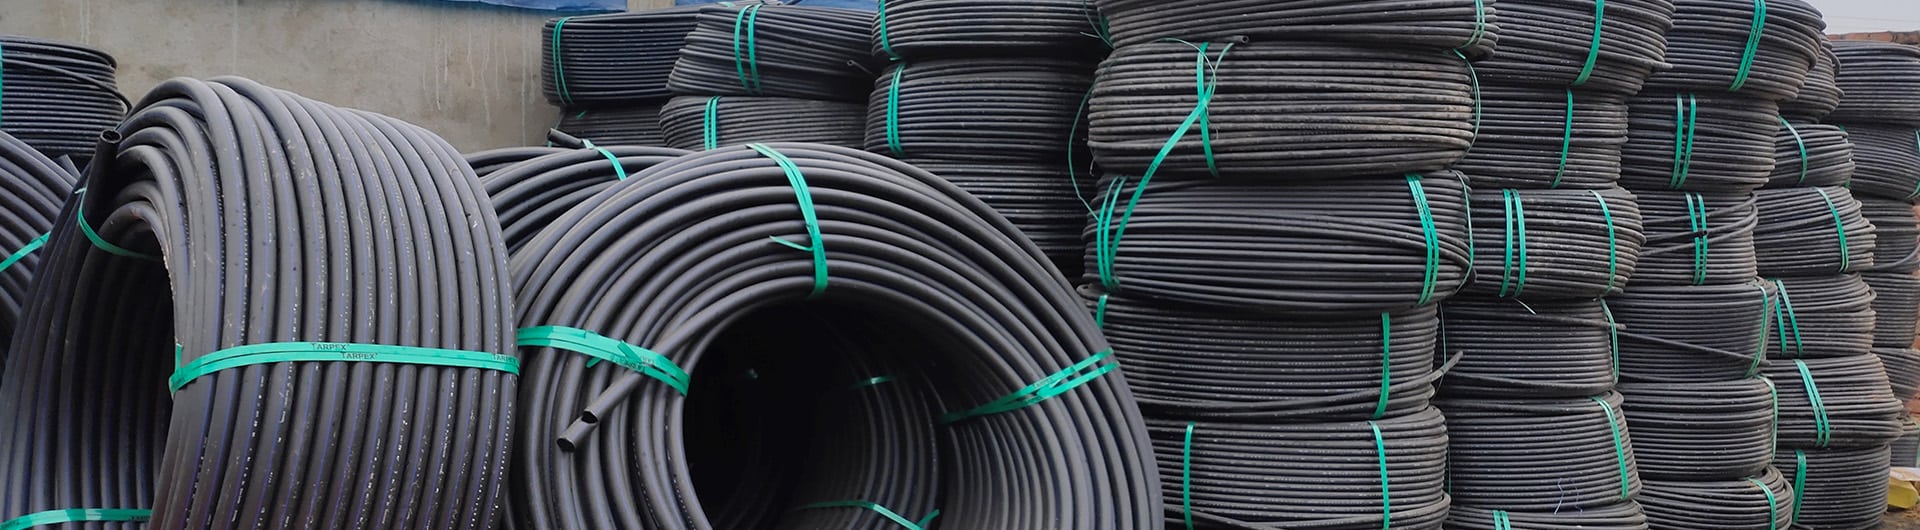 hdpe pipe suppliers in india